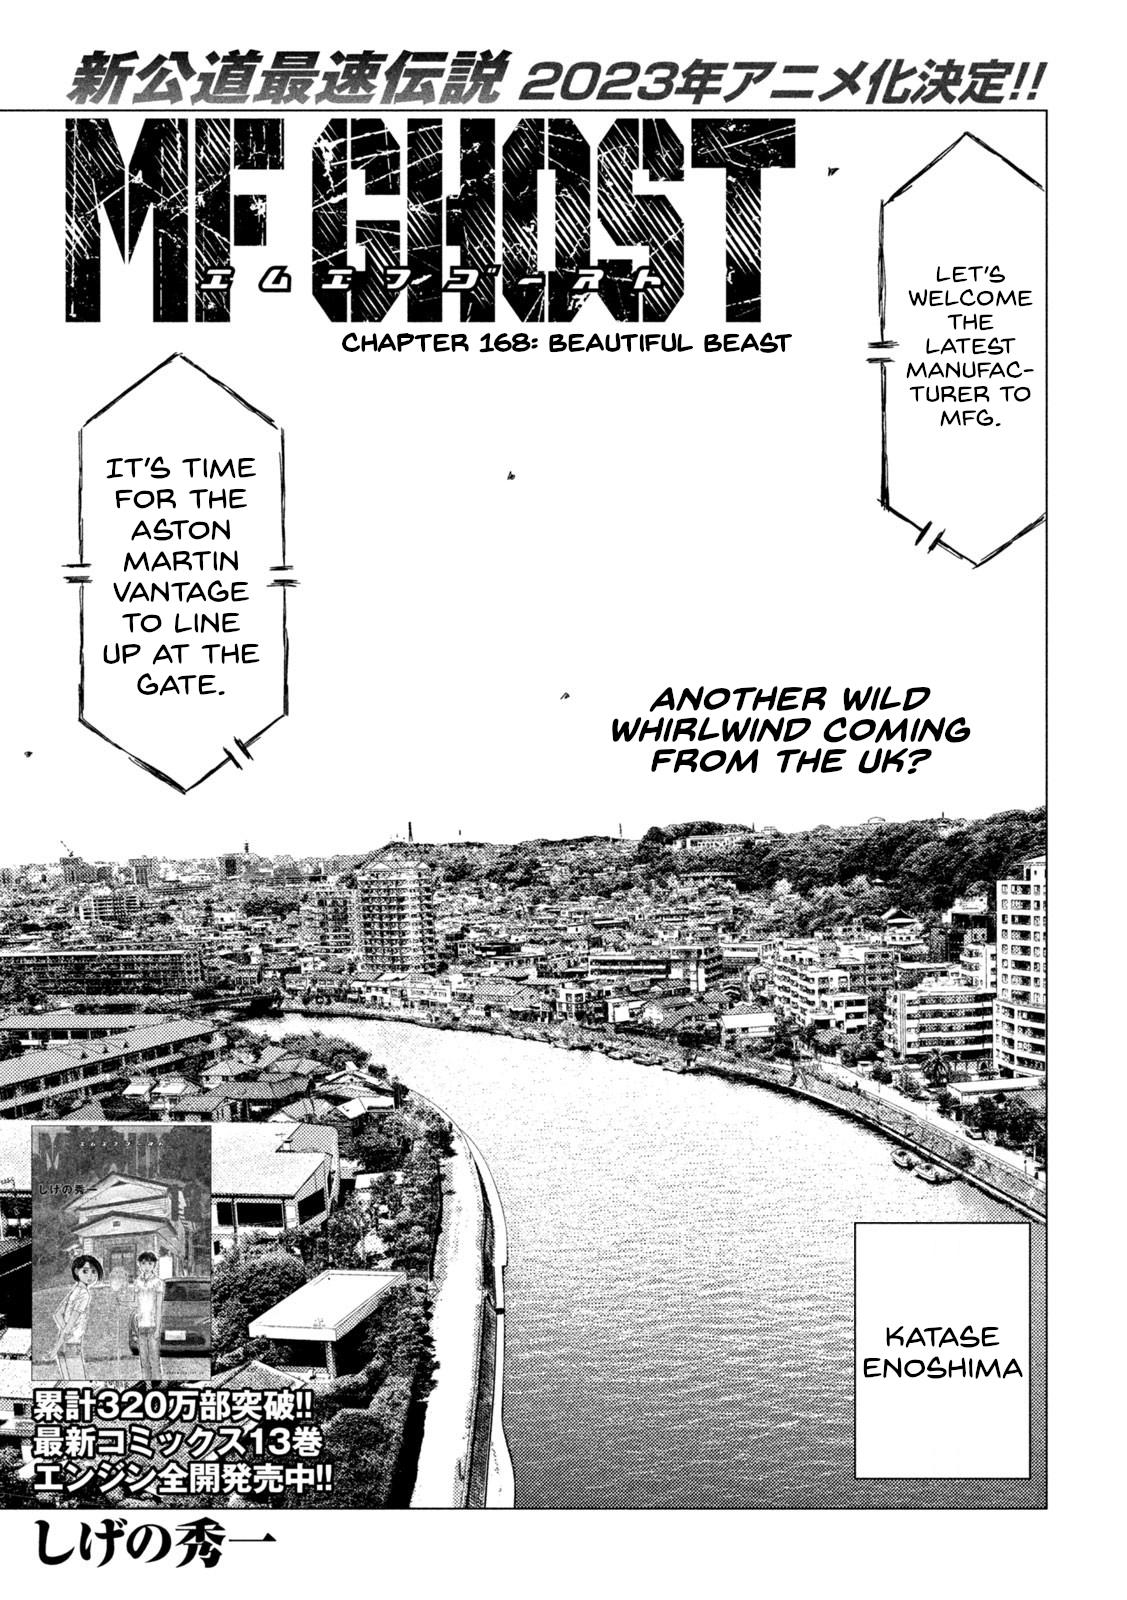 MF Ghost Vol.15 Chapter 168